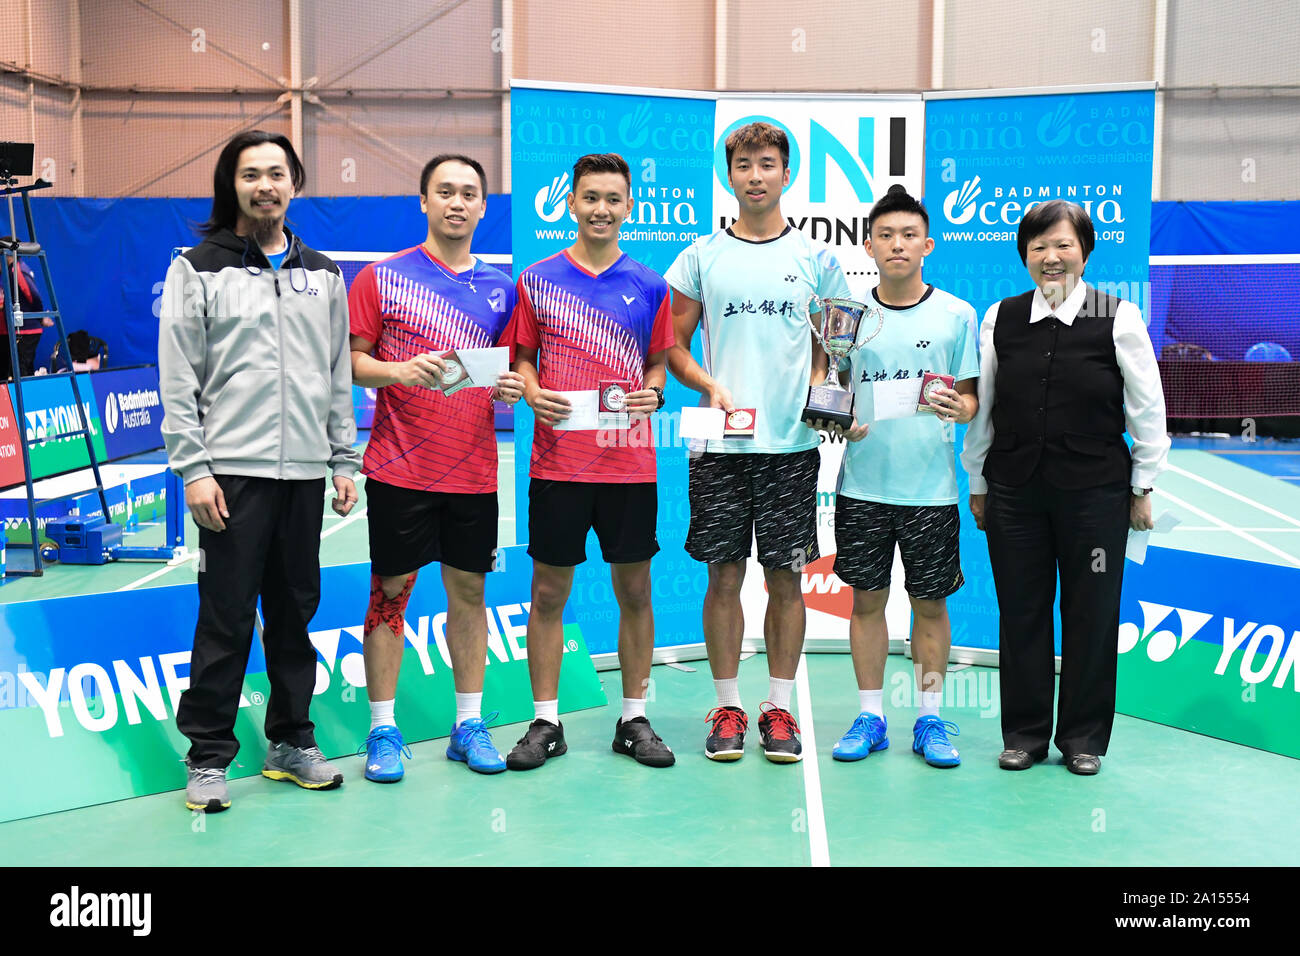 Alvin Morada and Peter Gabriel Magnaye (Philippines) seen during the Men's Single medal awarding ceremony of the 2019 Sydney International, Morada and Magnaye won silver medal by losing the finals to Chen Xin-Yuan and Lin Yu Chieh (Chinese Taipei) 21-9, 11-21, 15-21.  From left to right: Yonex Australia area manager Michael Fariman, Magnaye, Morada, Chen, Lin and Badminton NSW President Carolyn Toh. Stock Photo